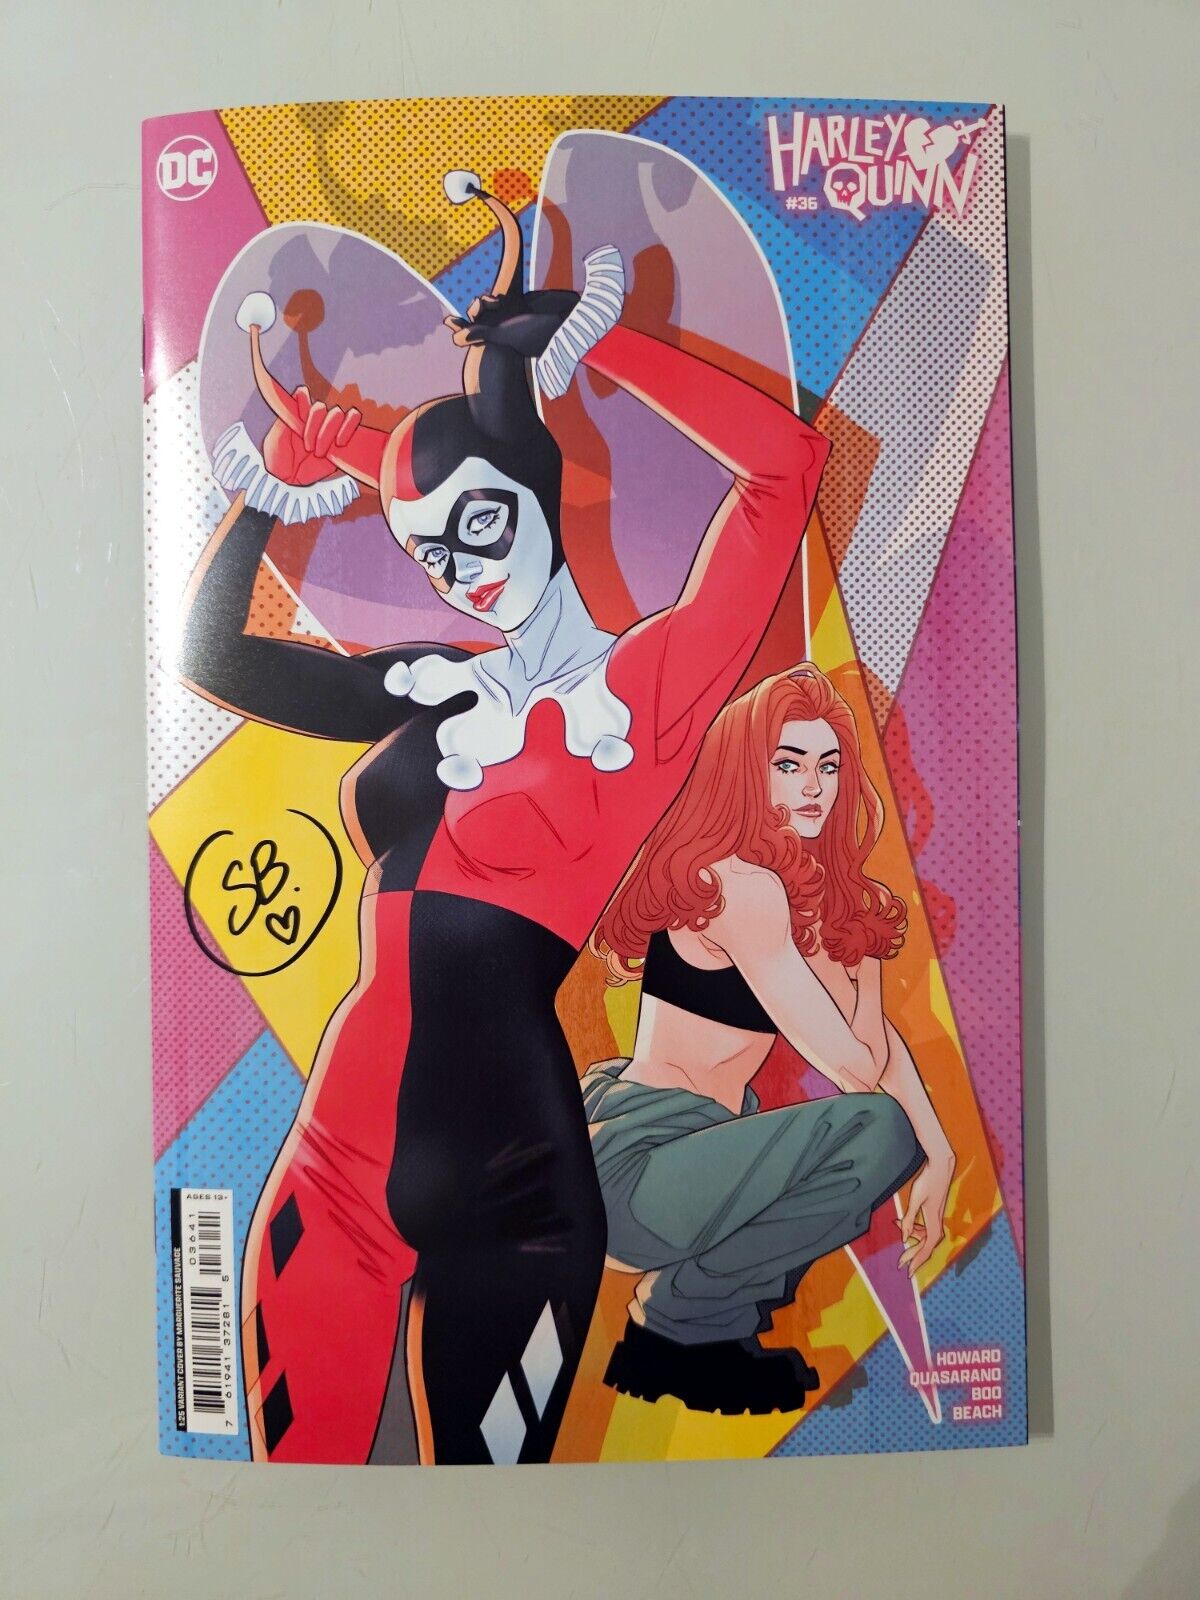 HARLEY QUINN #36 DC 1:25 MARGUERITE SAUVAGE VARIANT SIGNED BY SWEENEY BOO W/COA